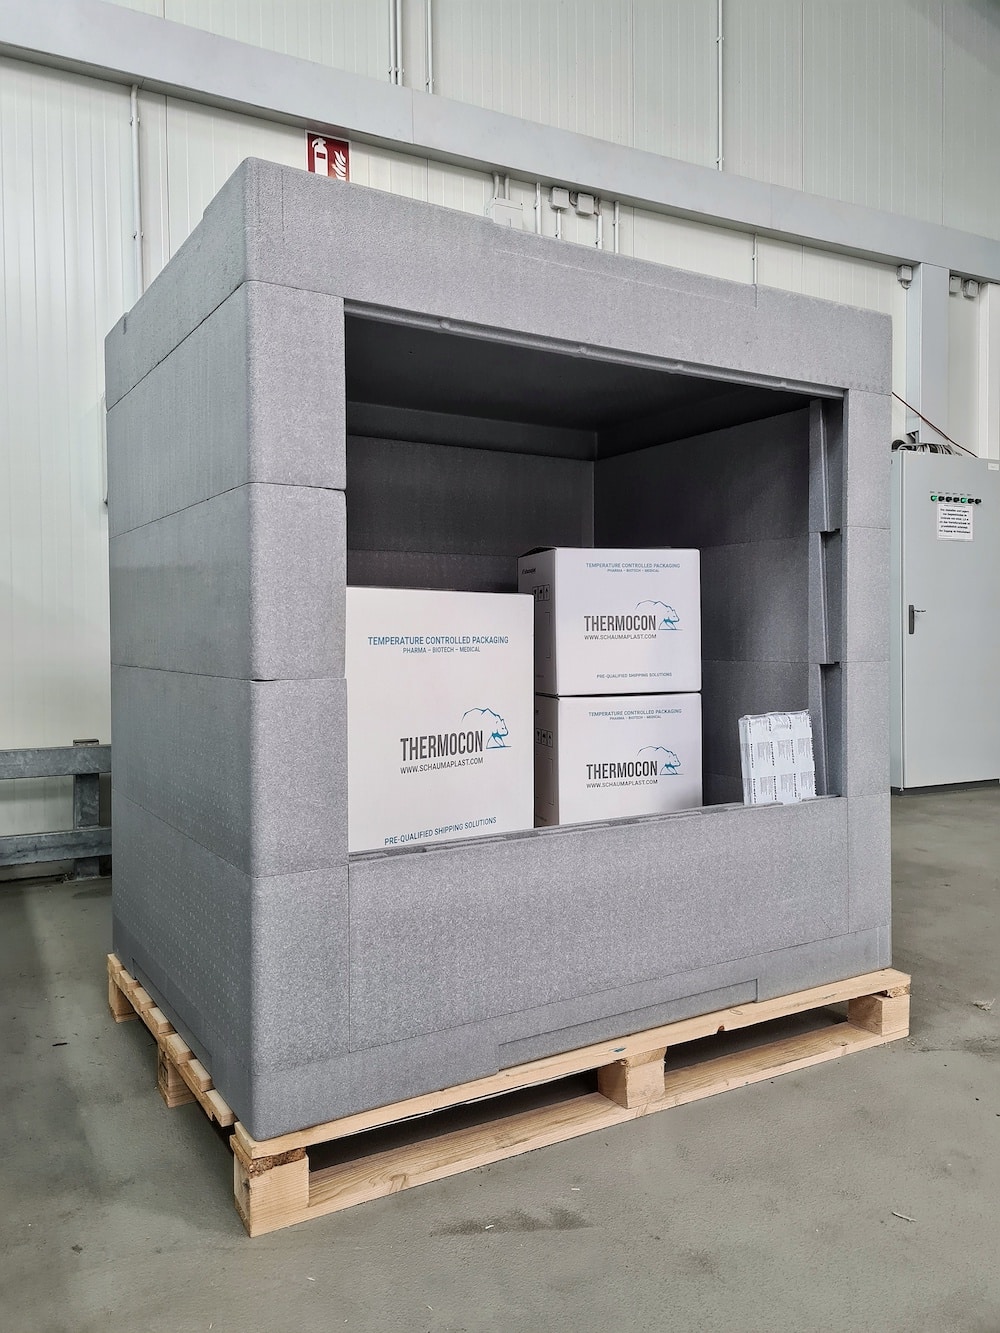 EPS expanded polystyrene - Pallet thermobox from Schaumaplast/Thermocon